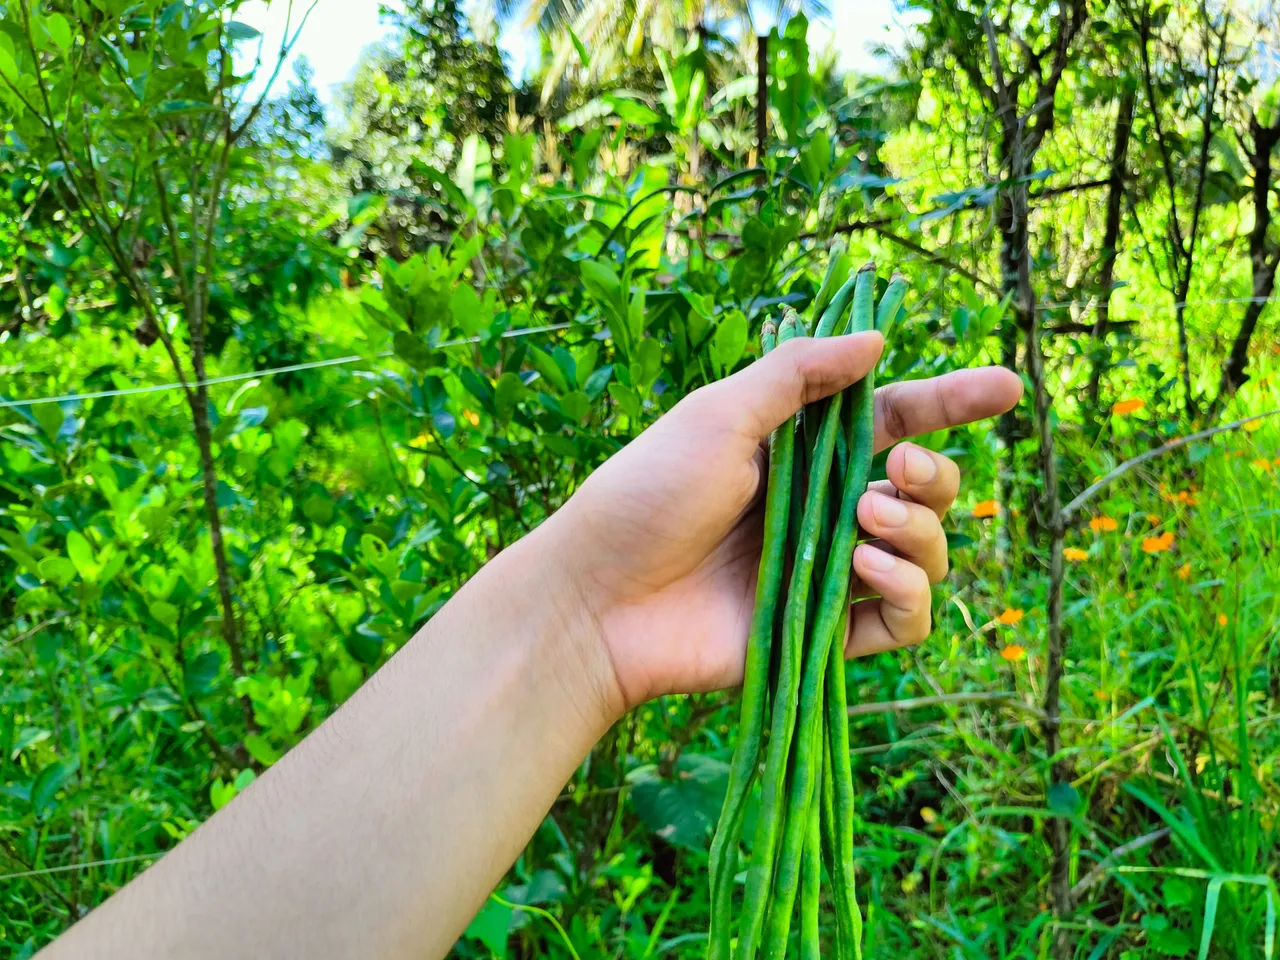 Beans, such as String (Snake/Yard) Beans as a source of Fiber and Protein